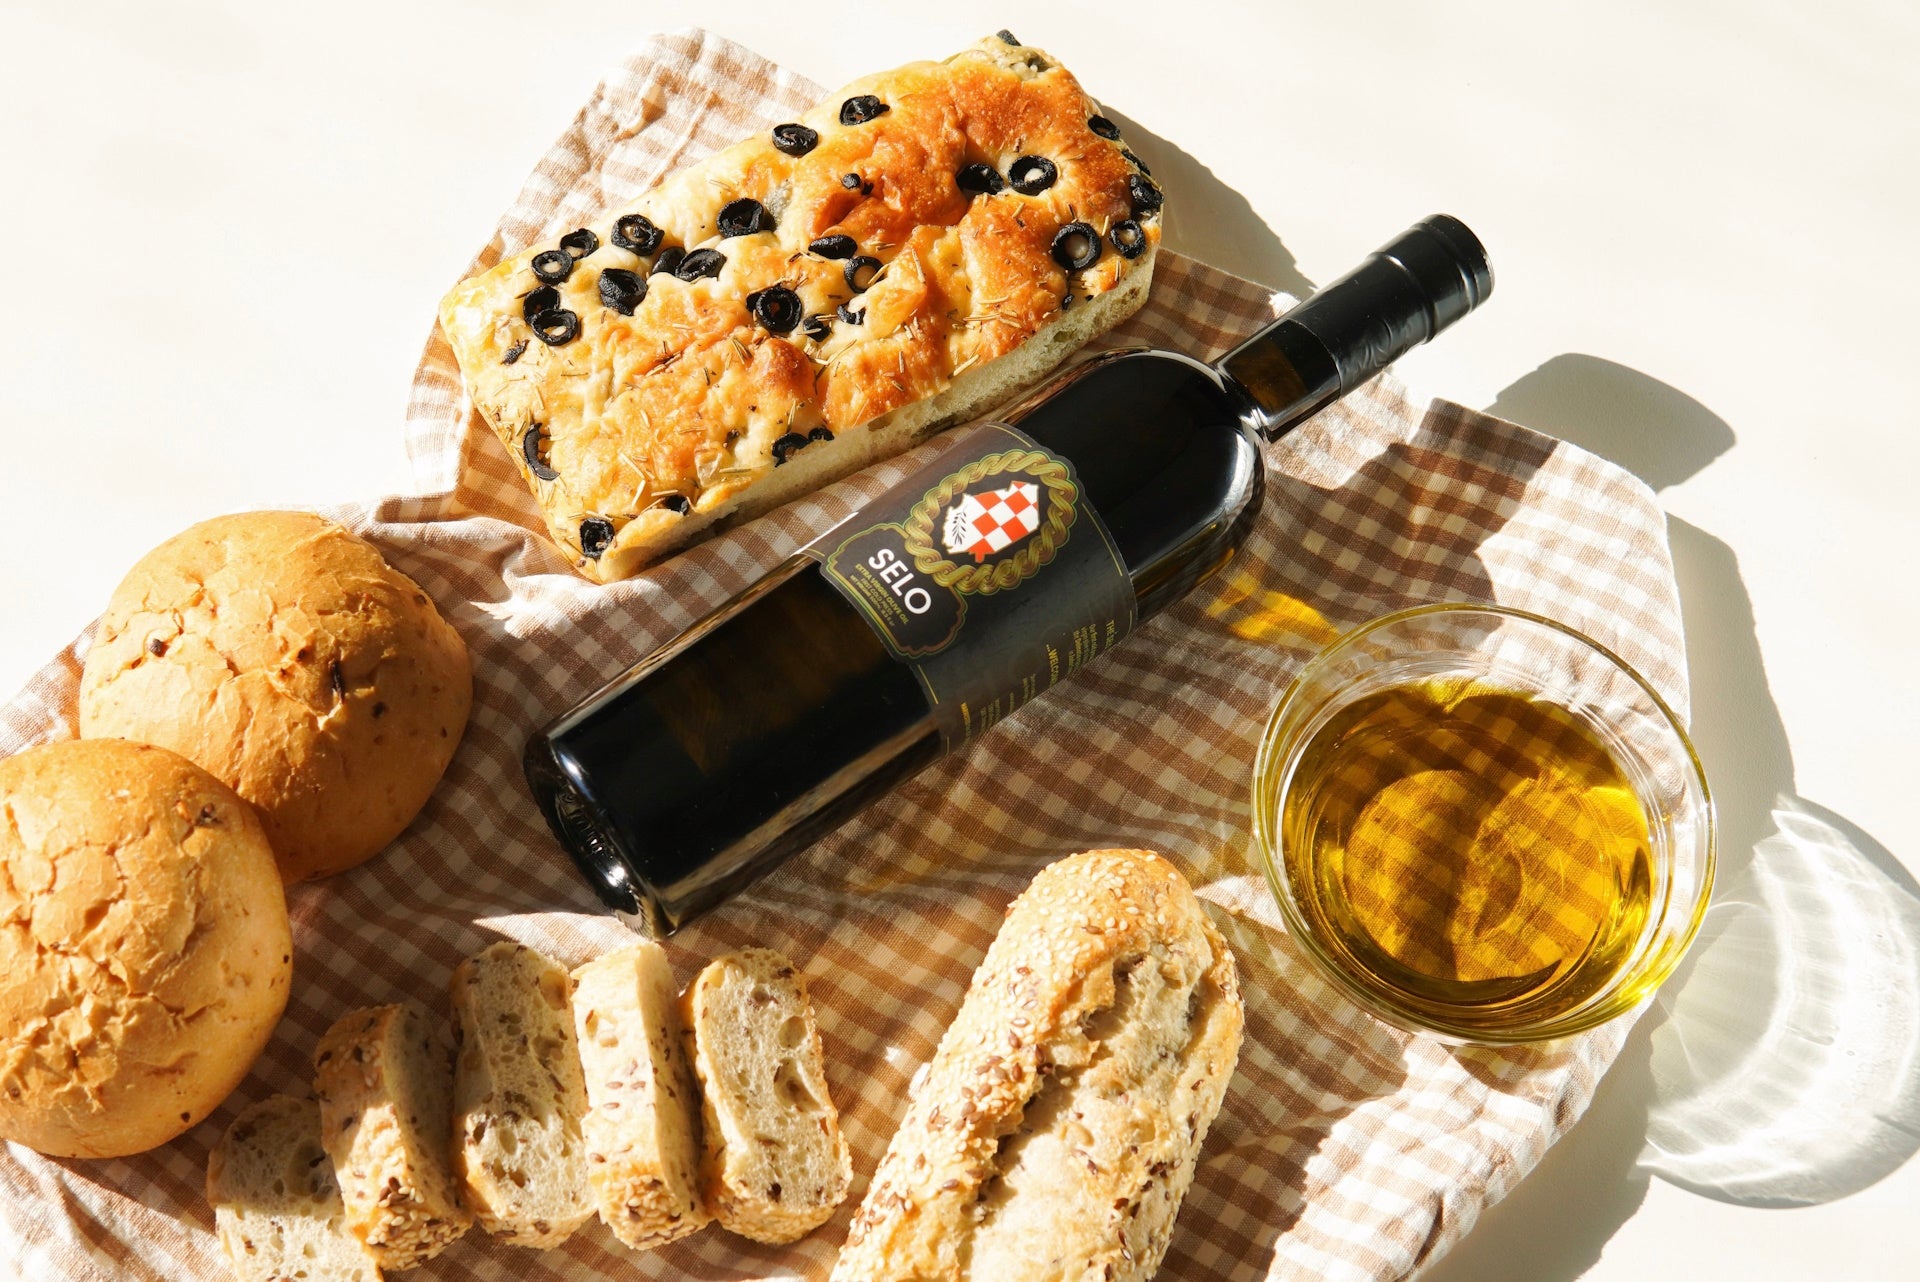 Freshly baked breads glistening with Selo extra virgin olive oil, a golden touch of perfection.